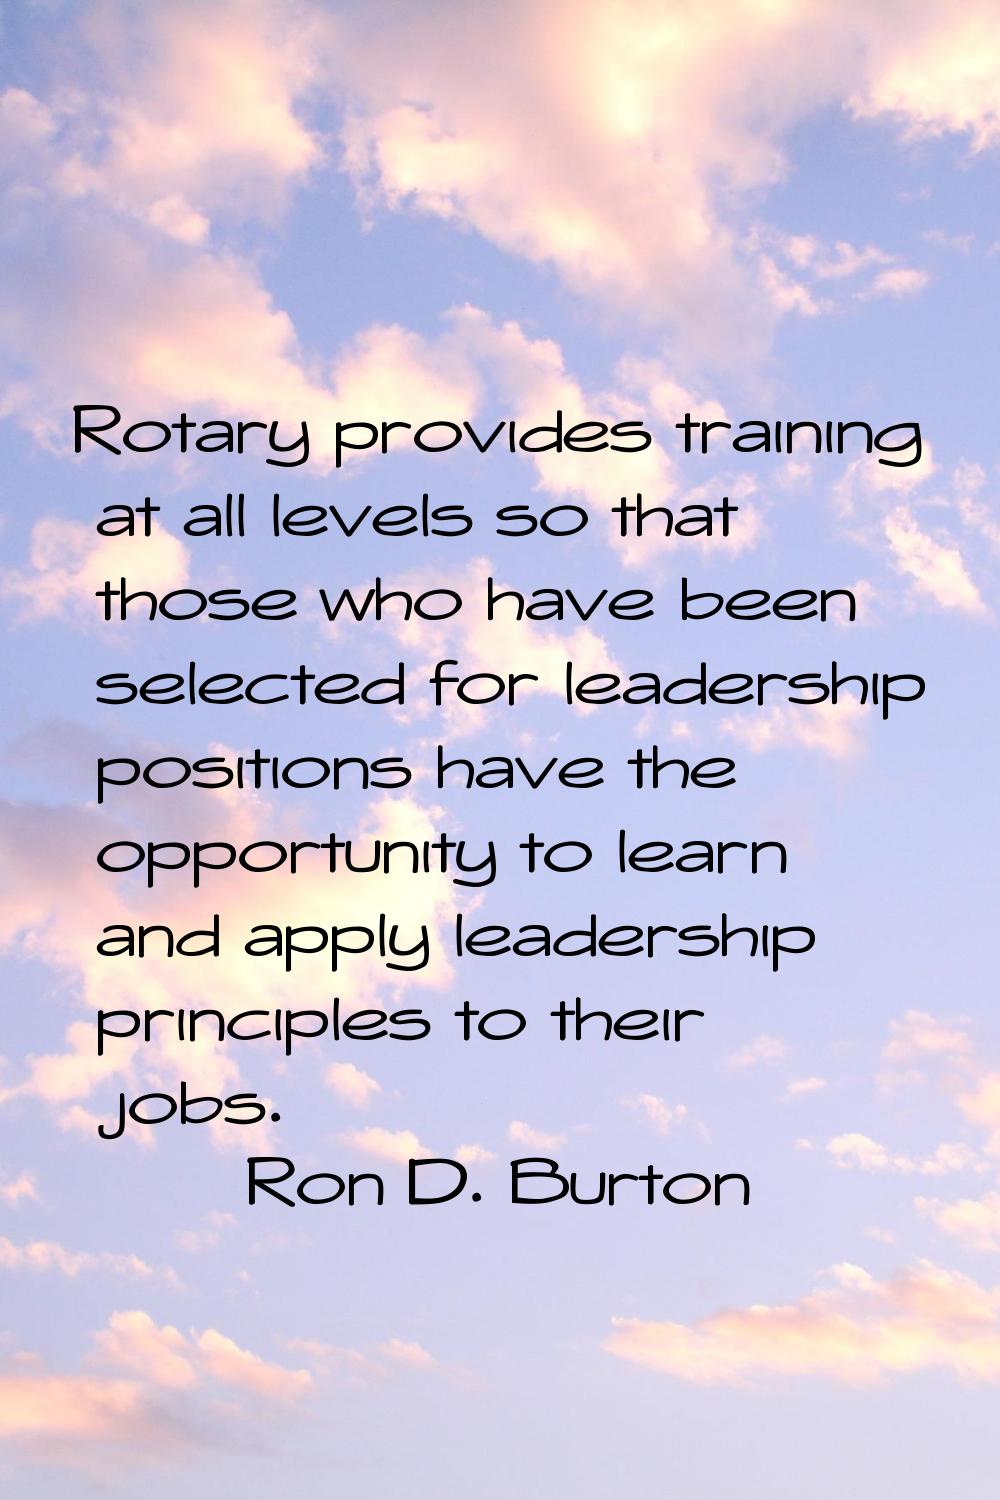 Rotary provides training at all levels so that those who have been selected for leadership position